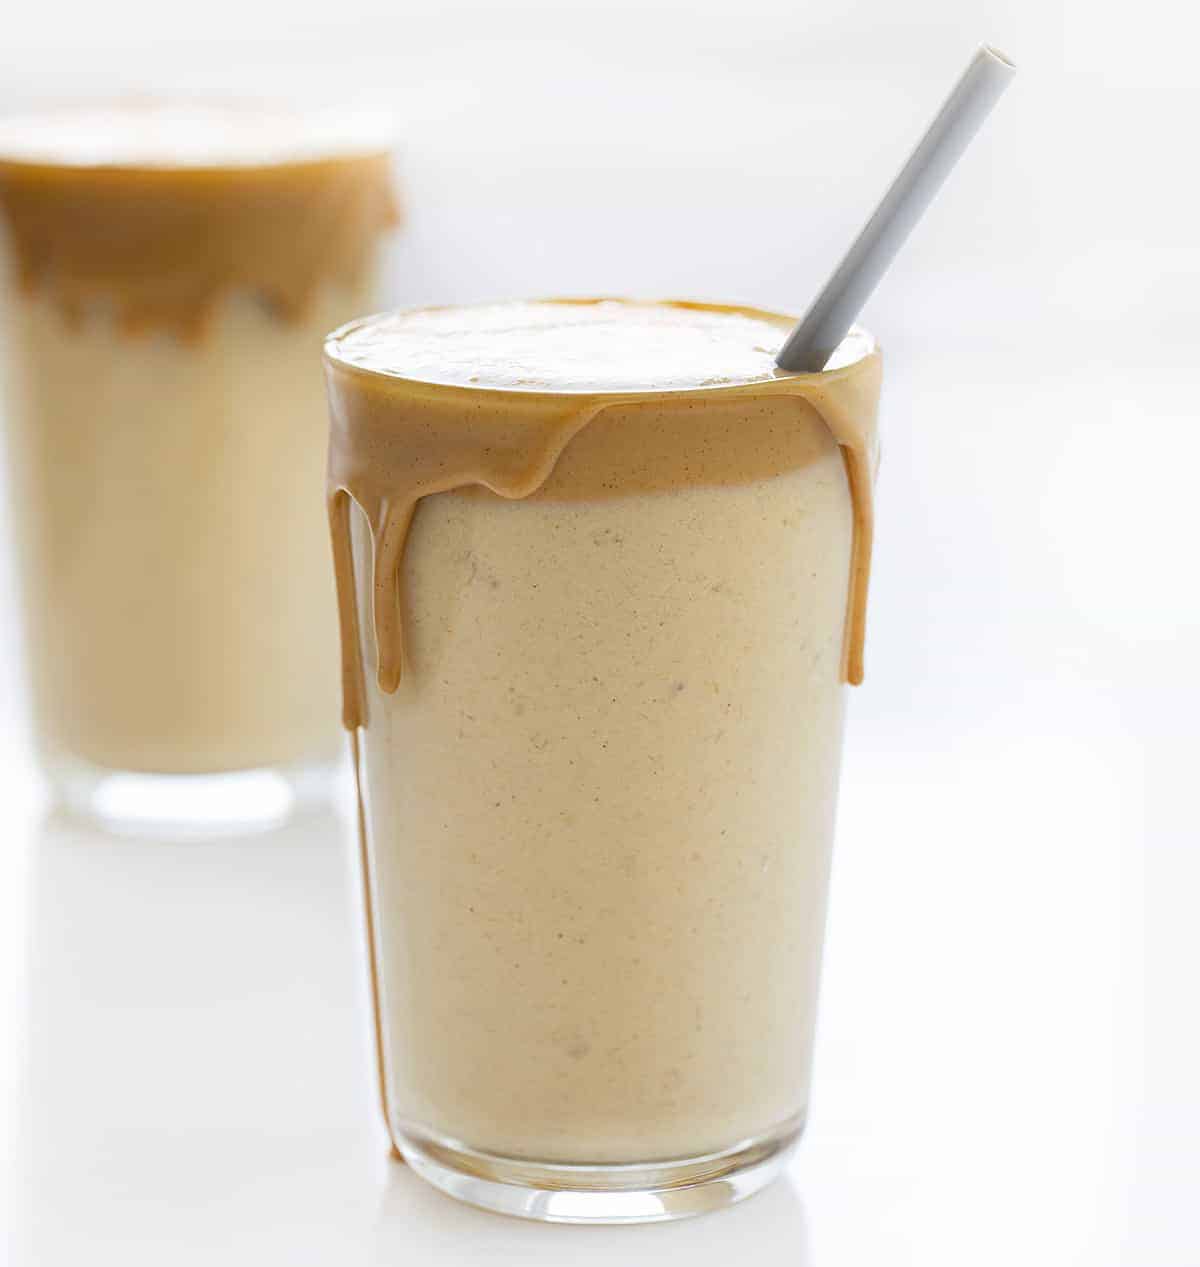 Peanut Butter Banana Smoothie in a Glass with a Grey Plastic Straw